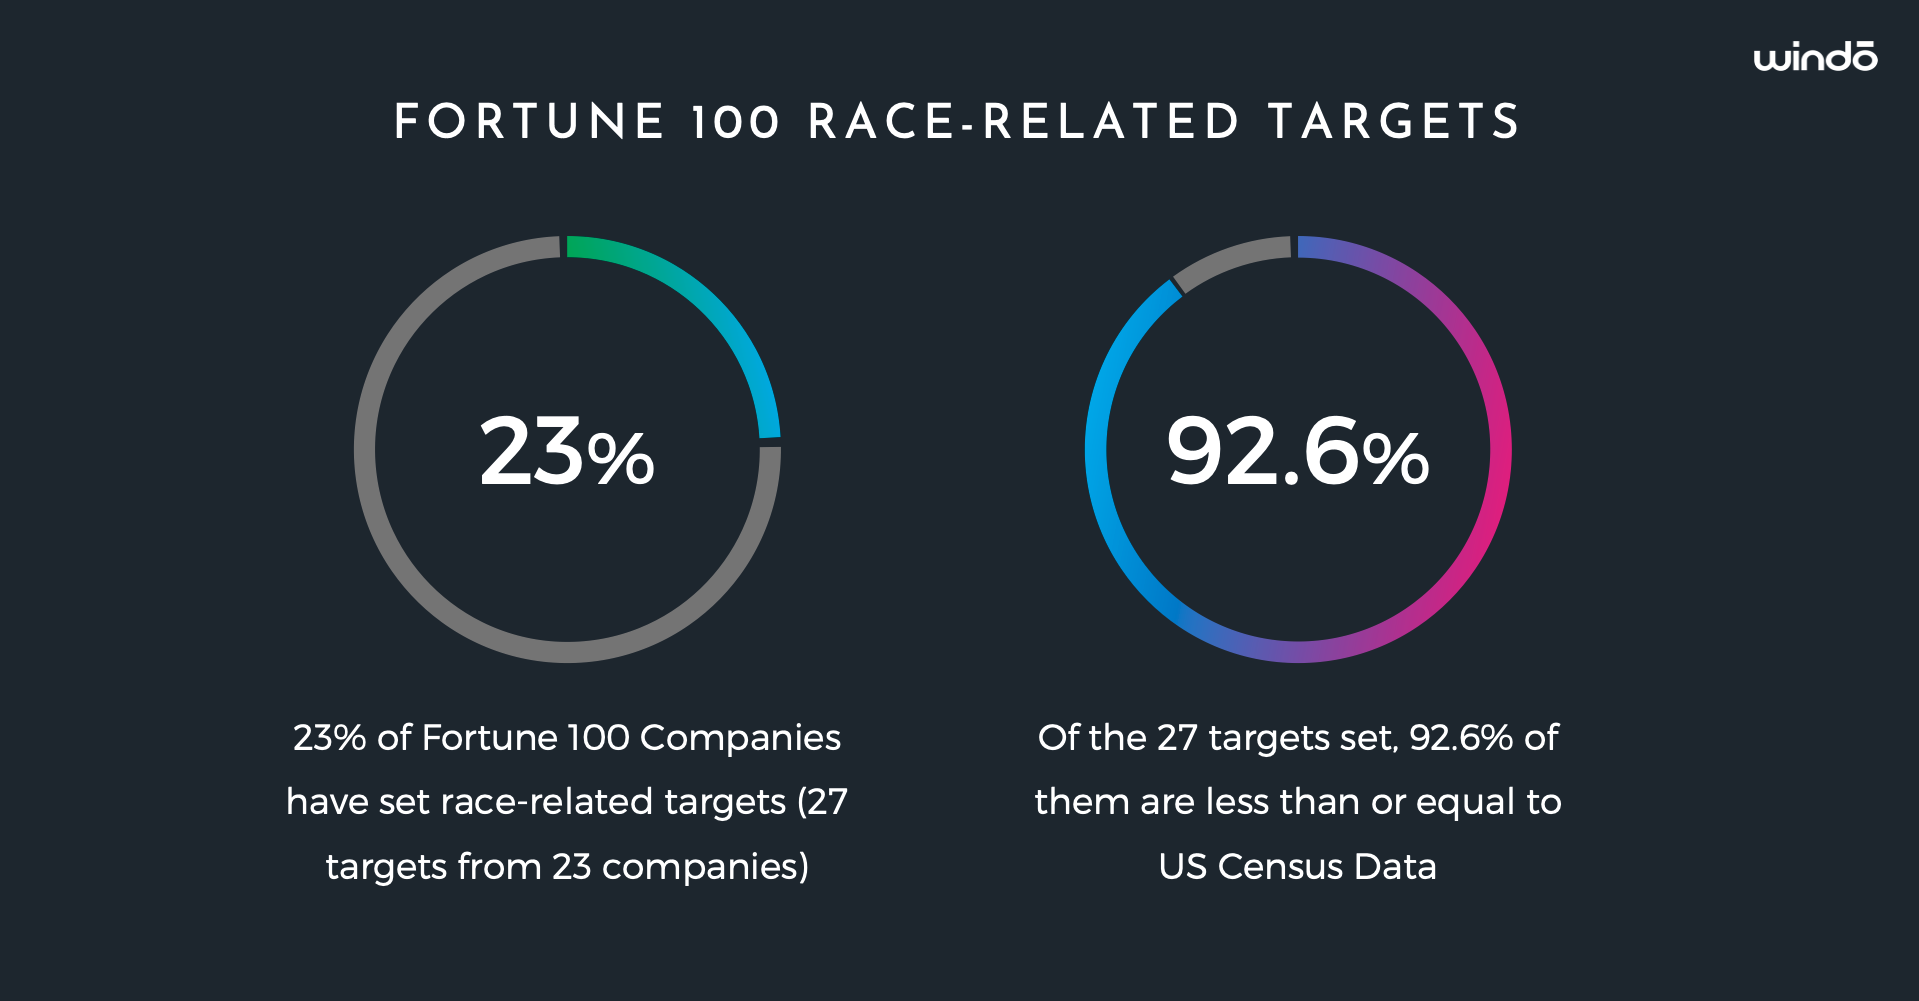 Windo_Race-Related_Targets_Fortune_100_Companies